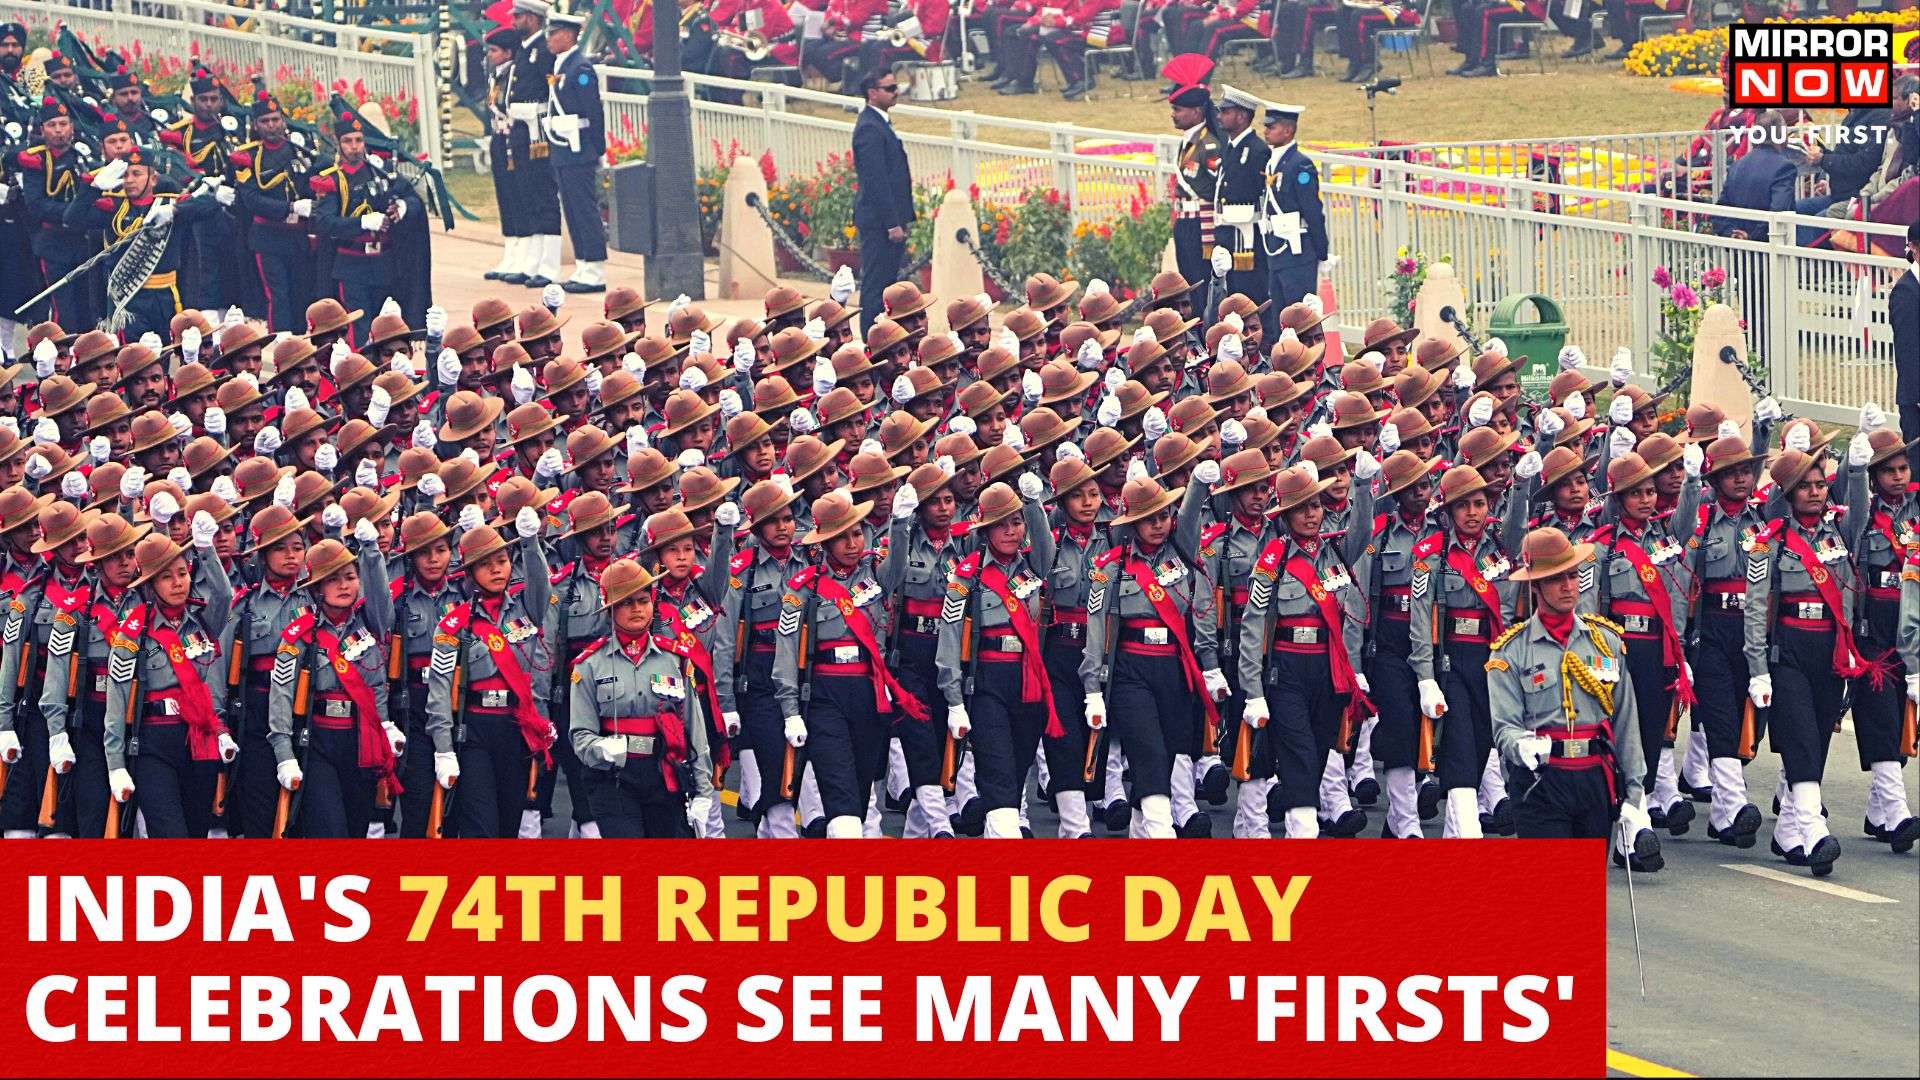 India celebrates 74th Republic Day Here are some key takeaways from